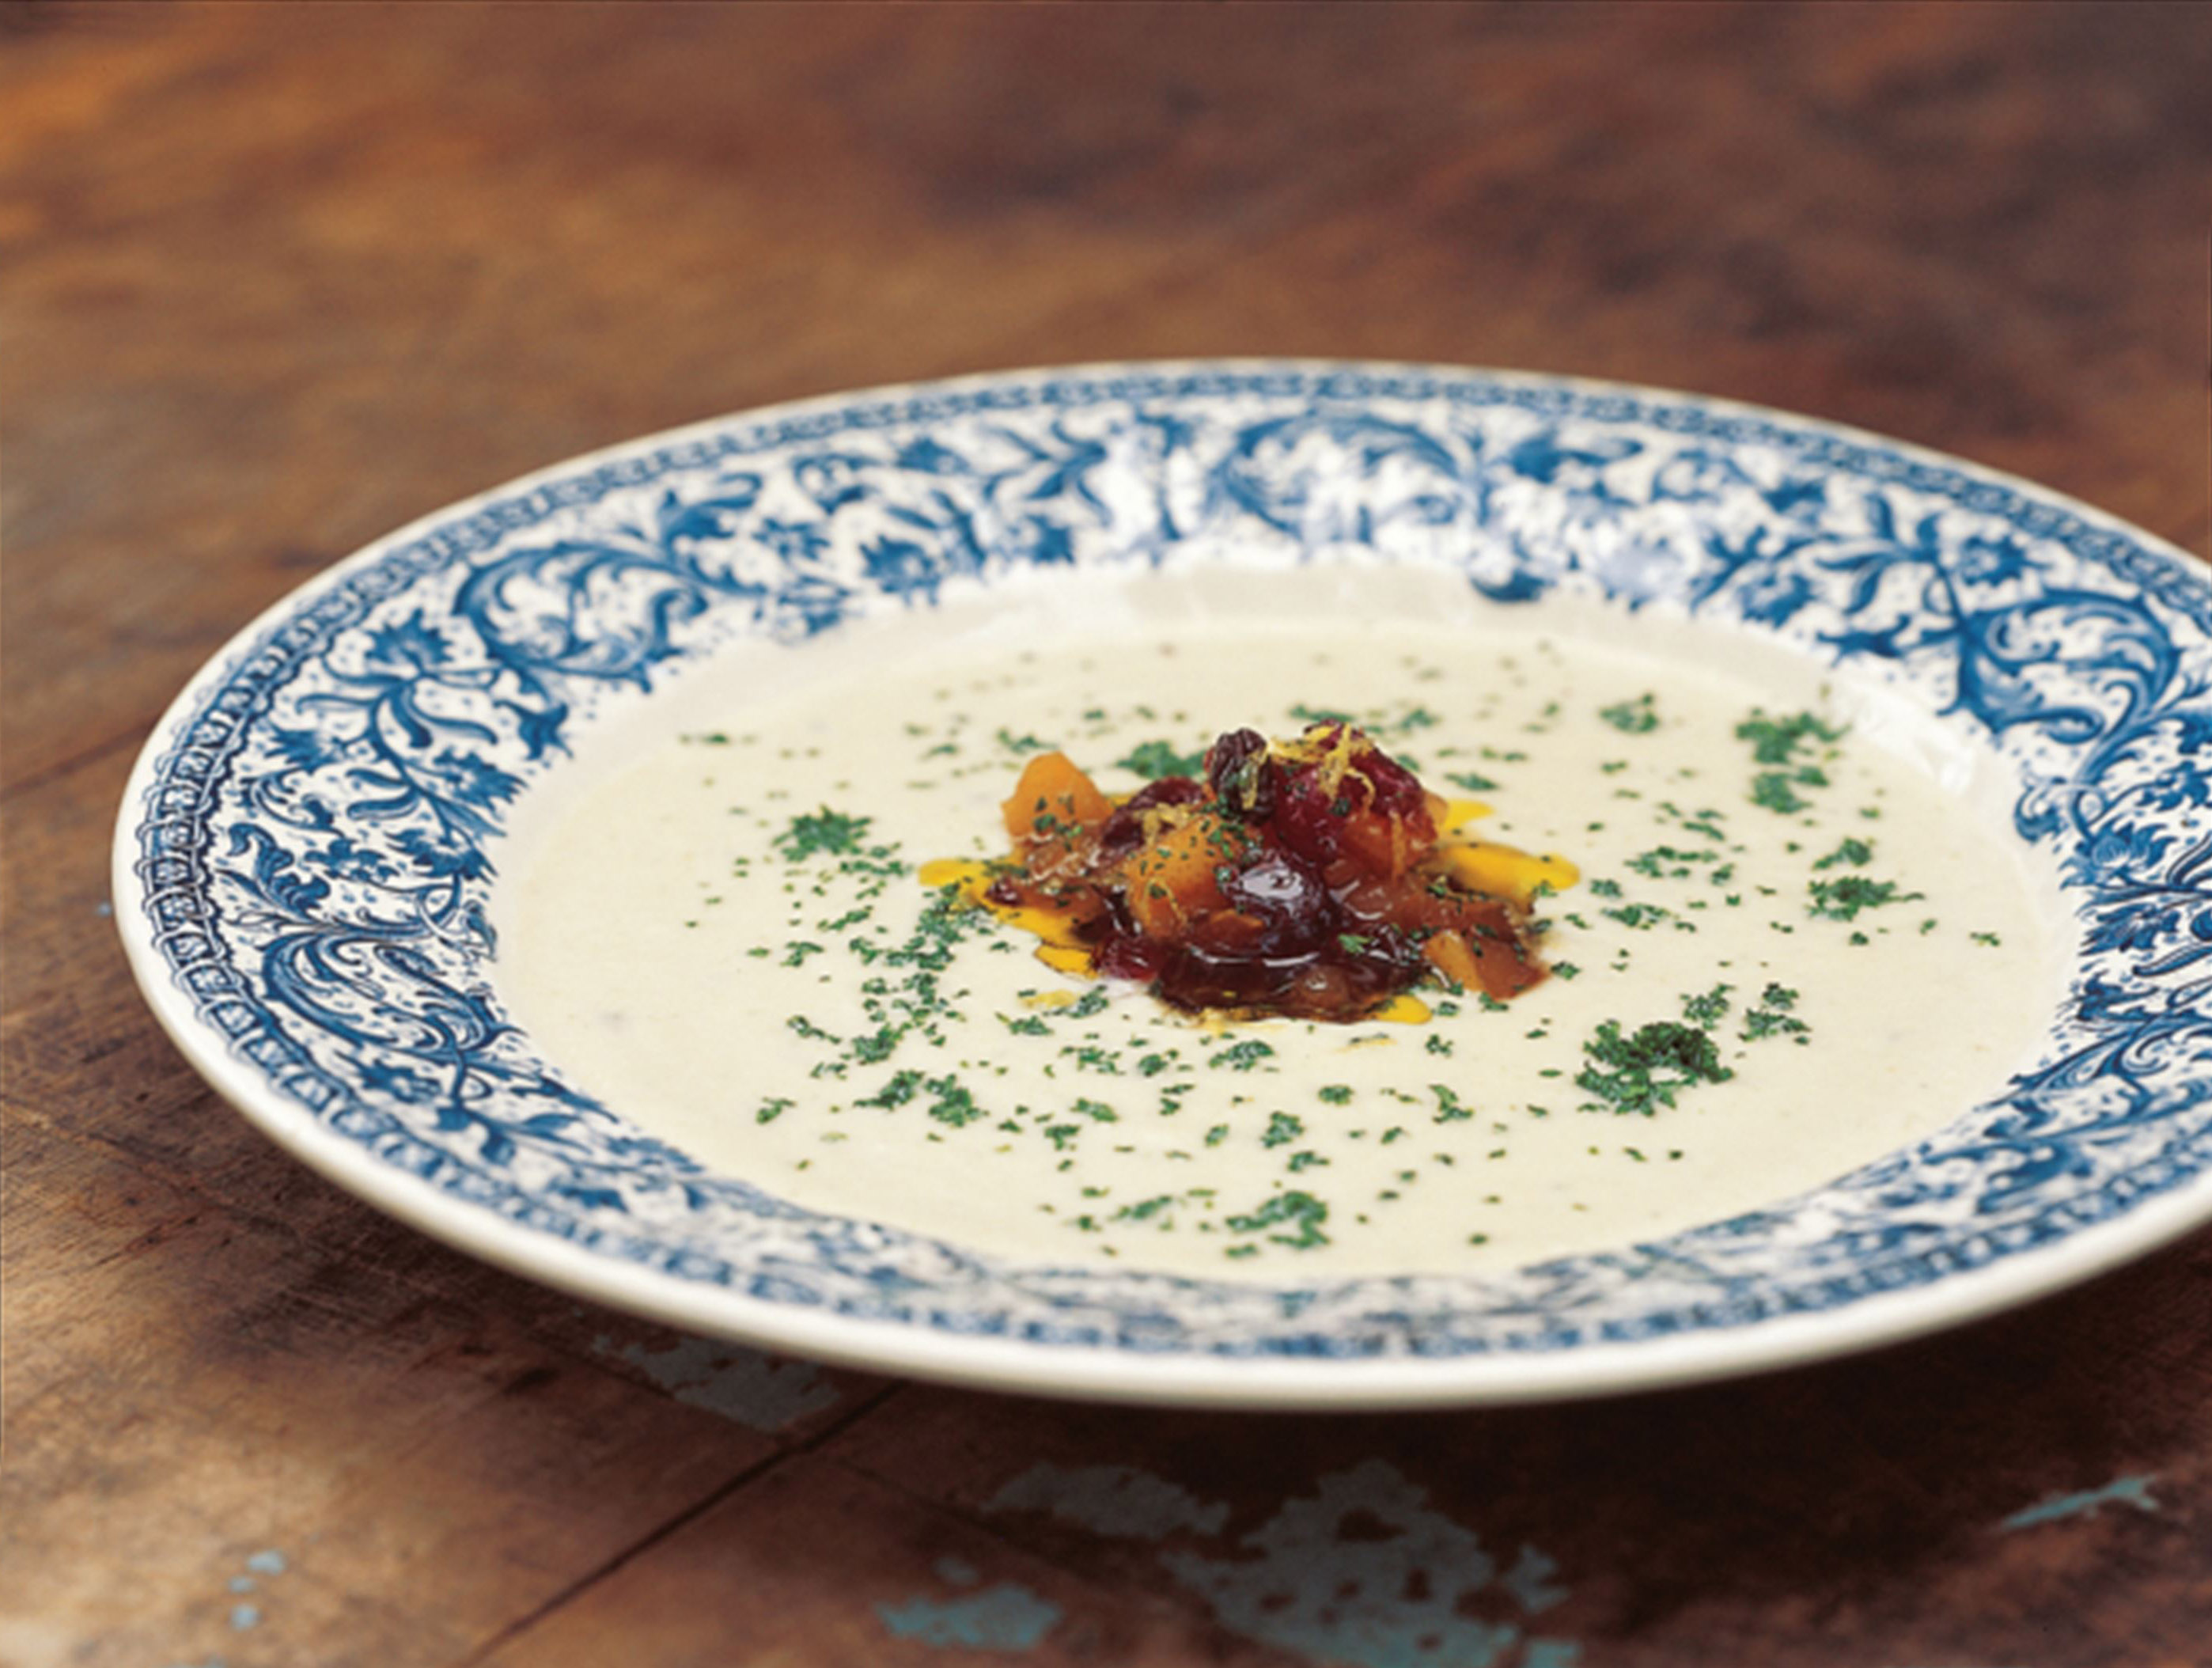 Cauliflower soup with gorgonzola and pickled pear relish